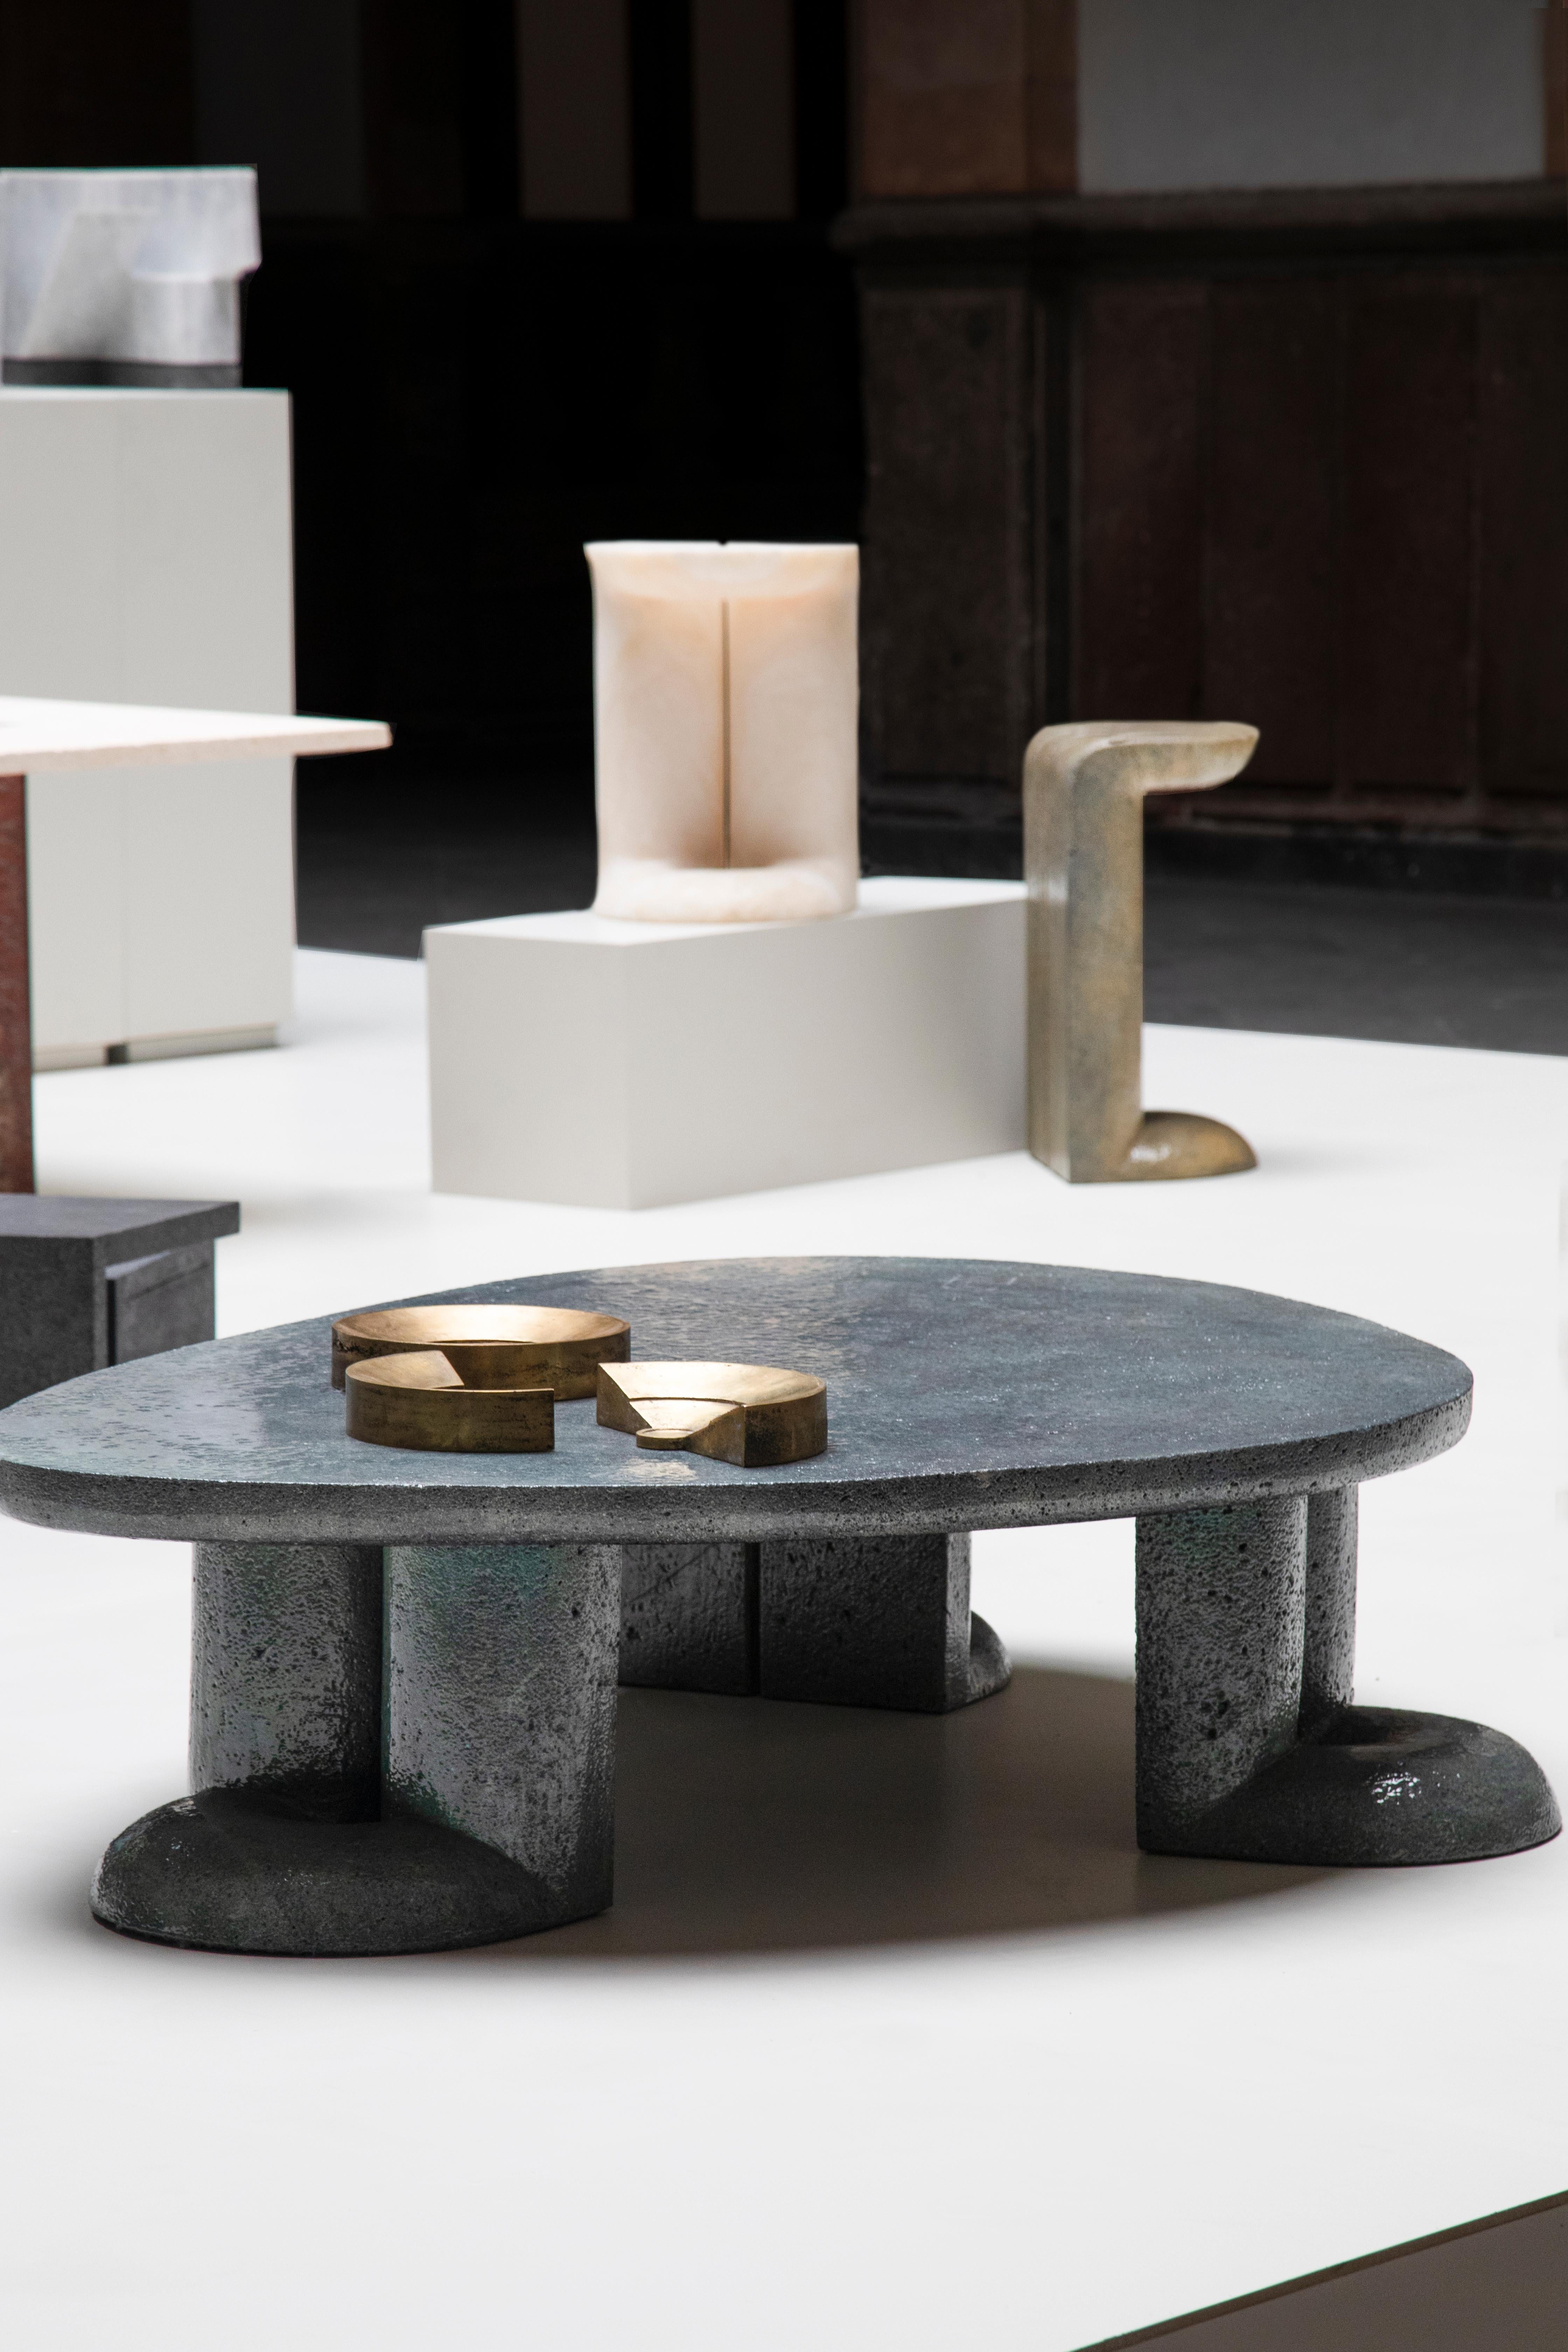 Mullunu Coffee Table (2020) — by Ian Felton
Hand-carved lava stone coffee table with glossy ceramic color finish.

Mullunu Coffee Table, with its aquamarine and golden colors— materializes some of nature’s most treasured memories: the dancing rays